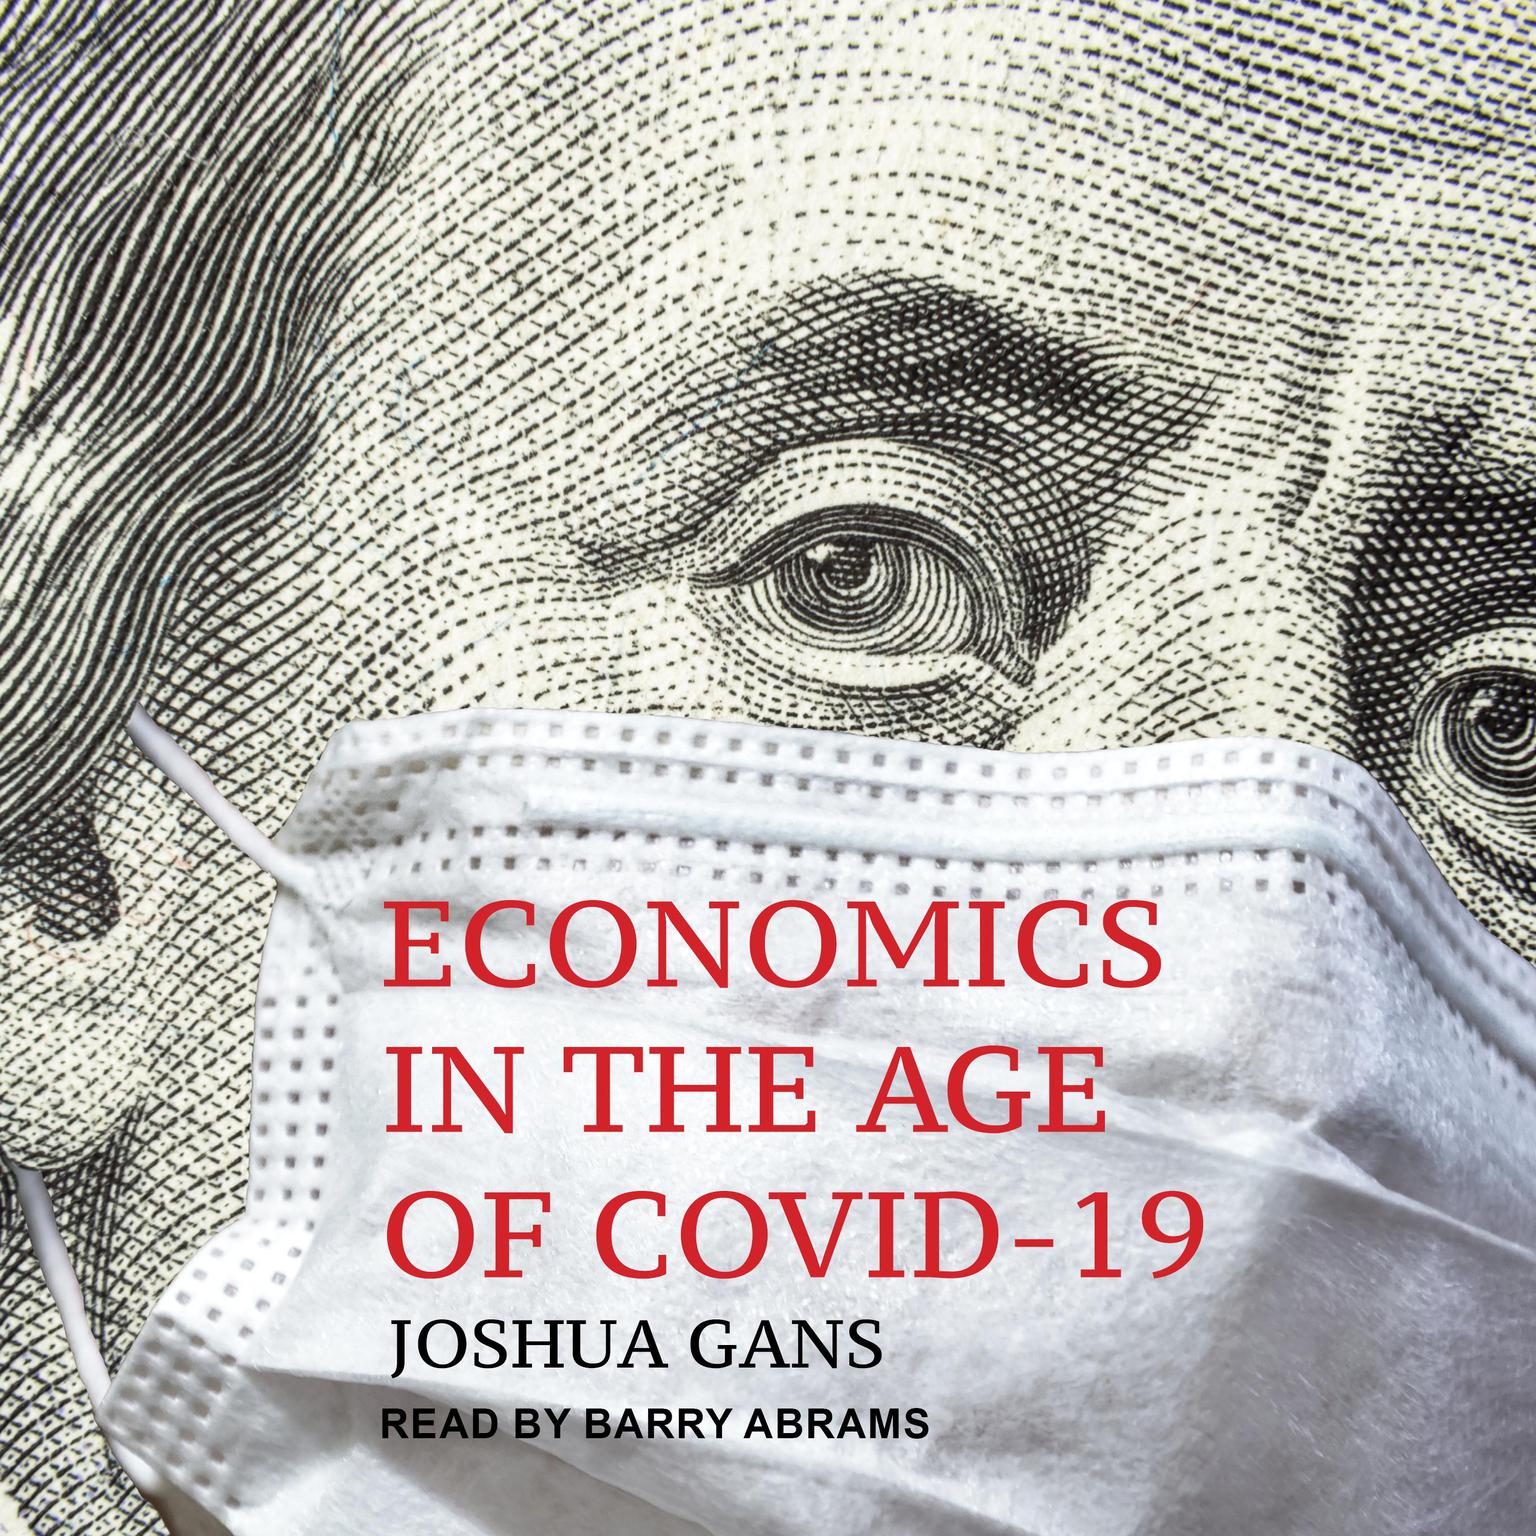 Economics in the Age of COVID-19 Audiobook, by Joshua Gans